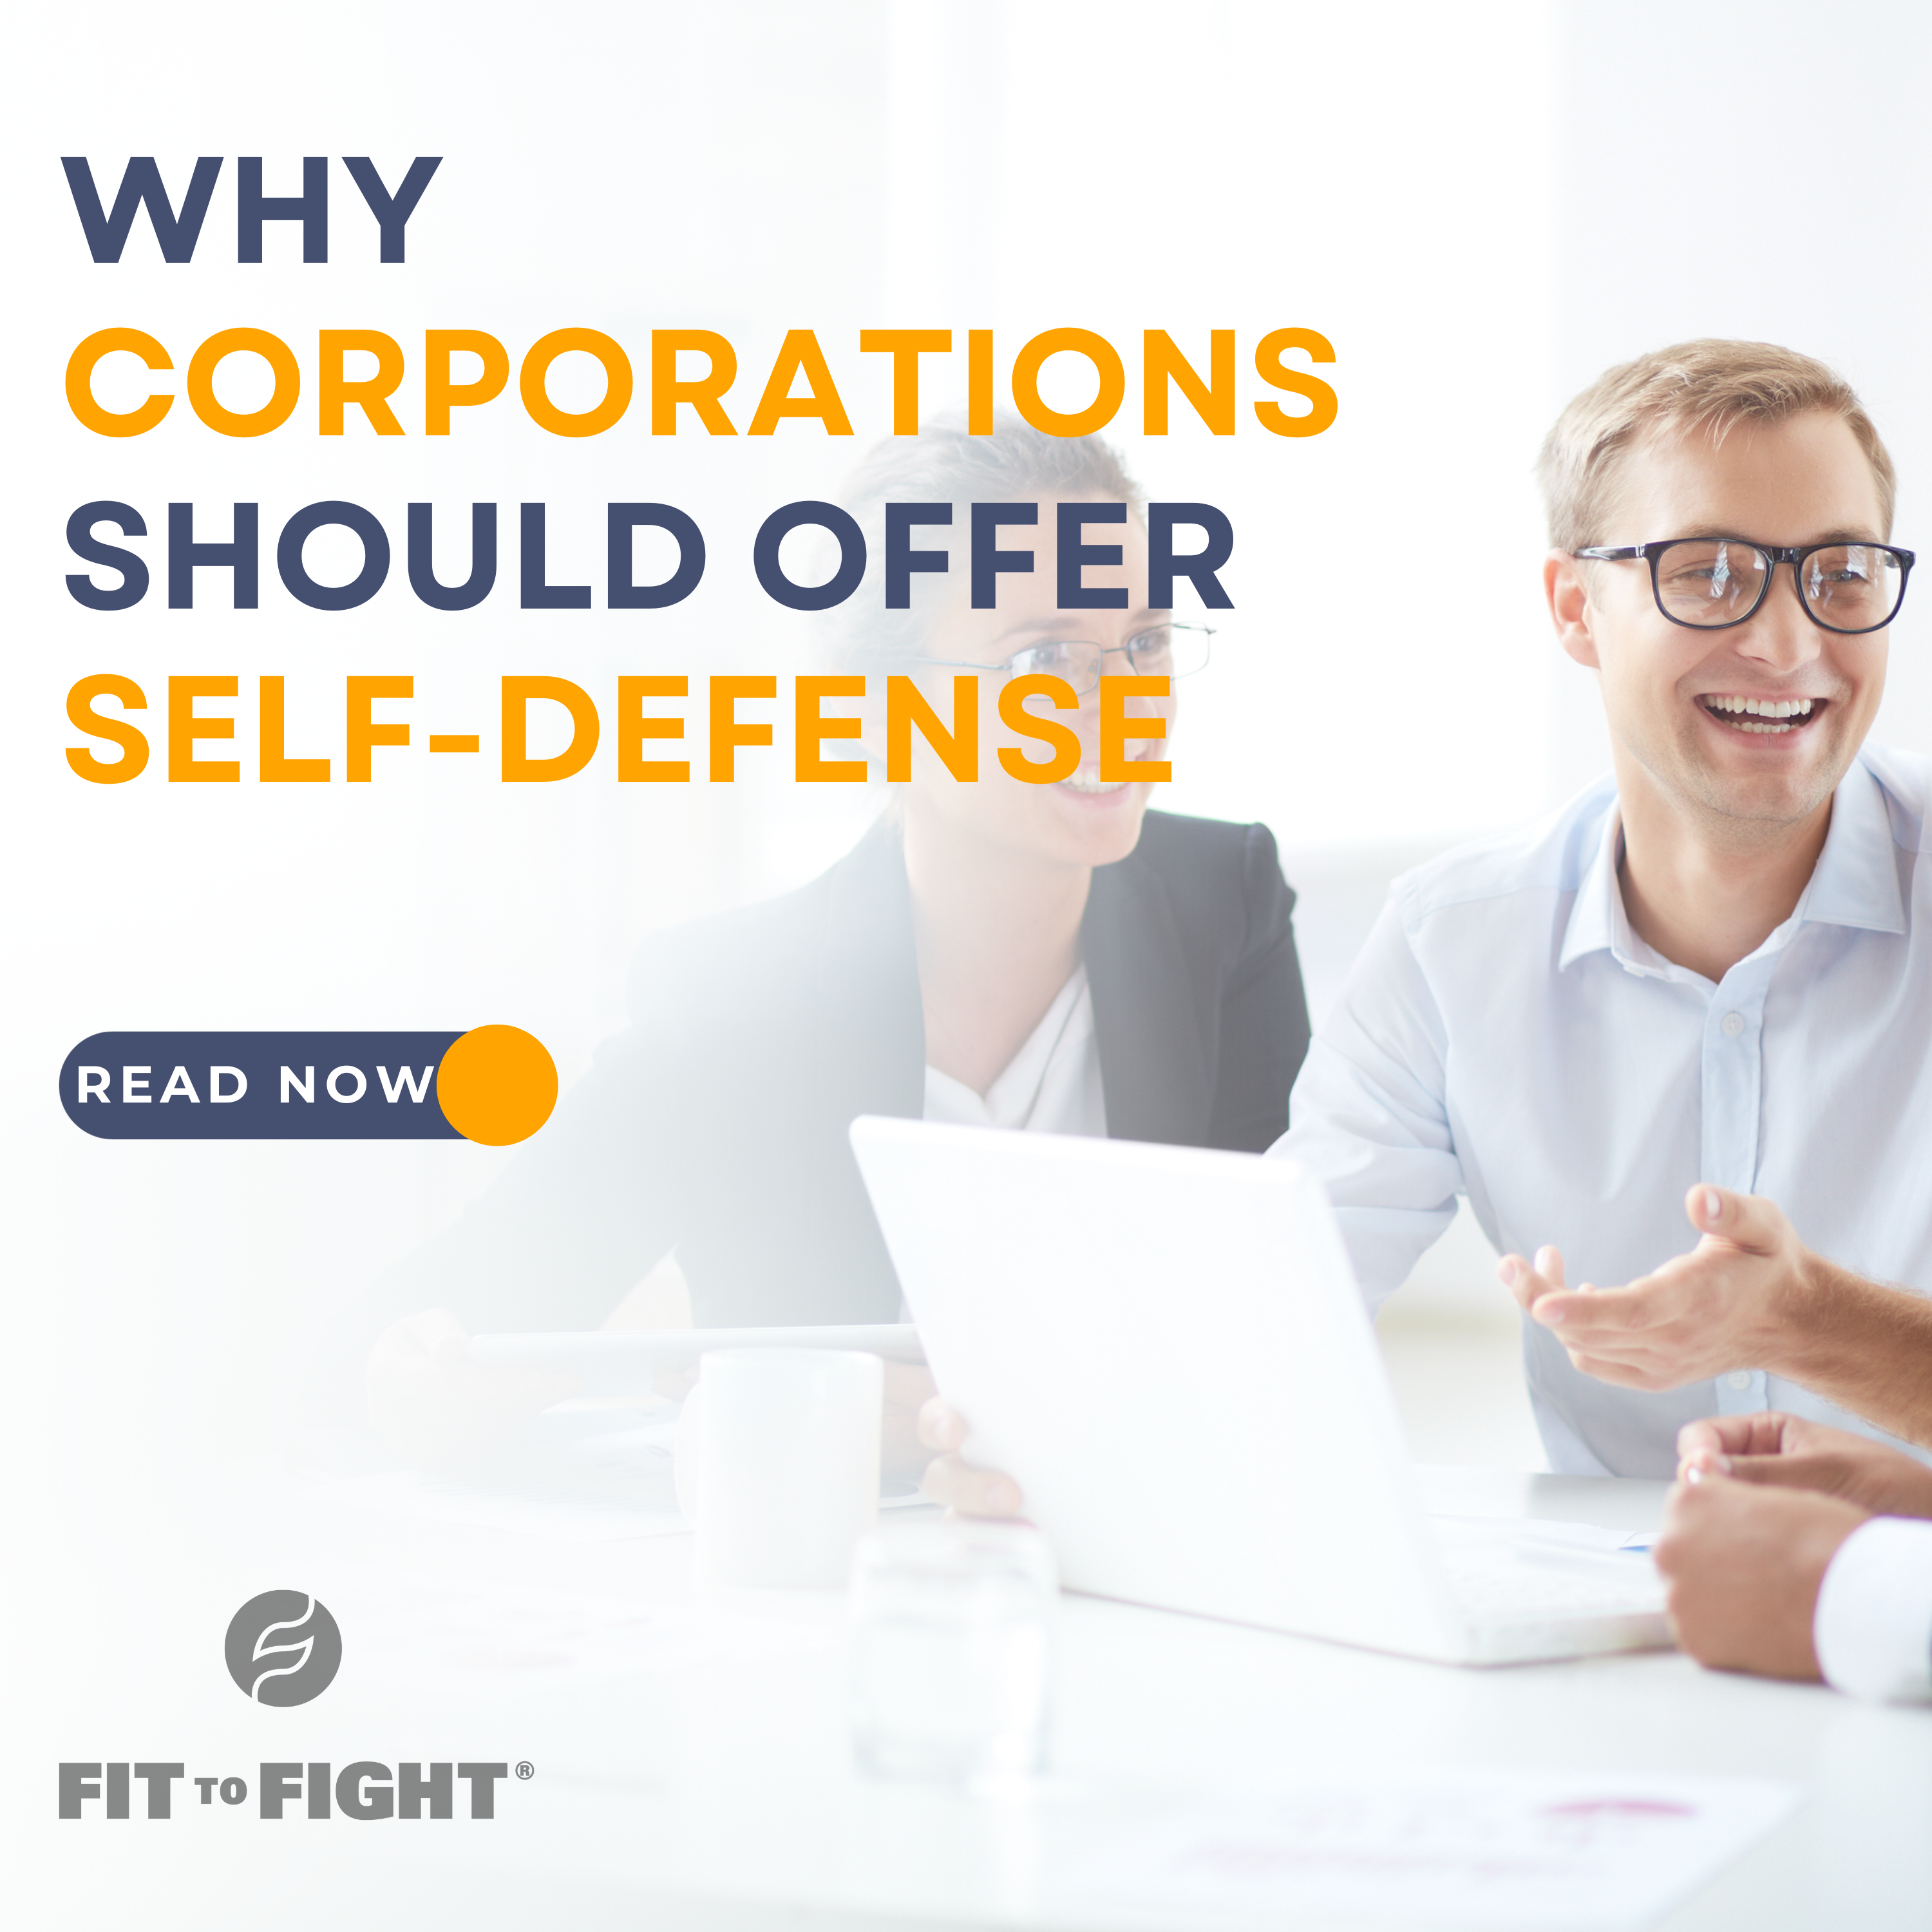 corporate employees at a table with laptop. title of why corporations should offer self-defense across the top